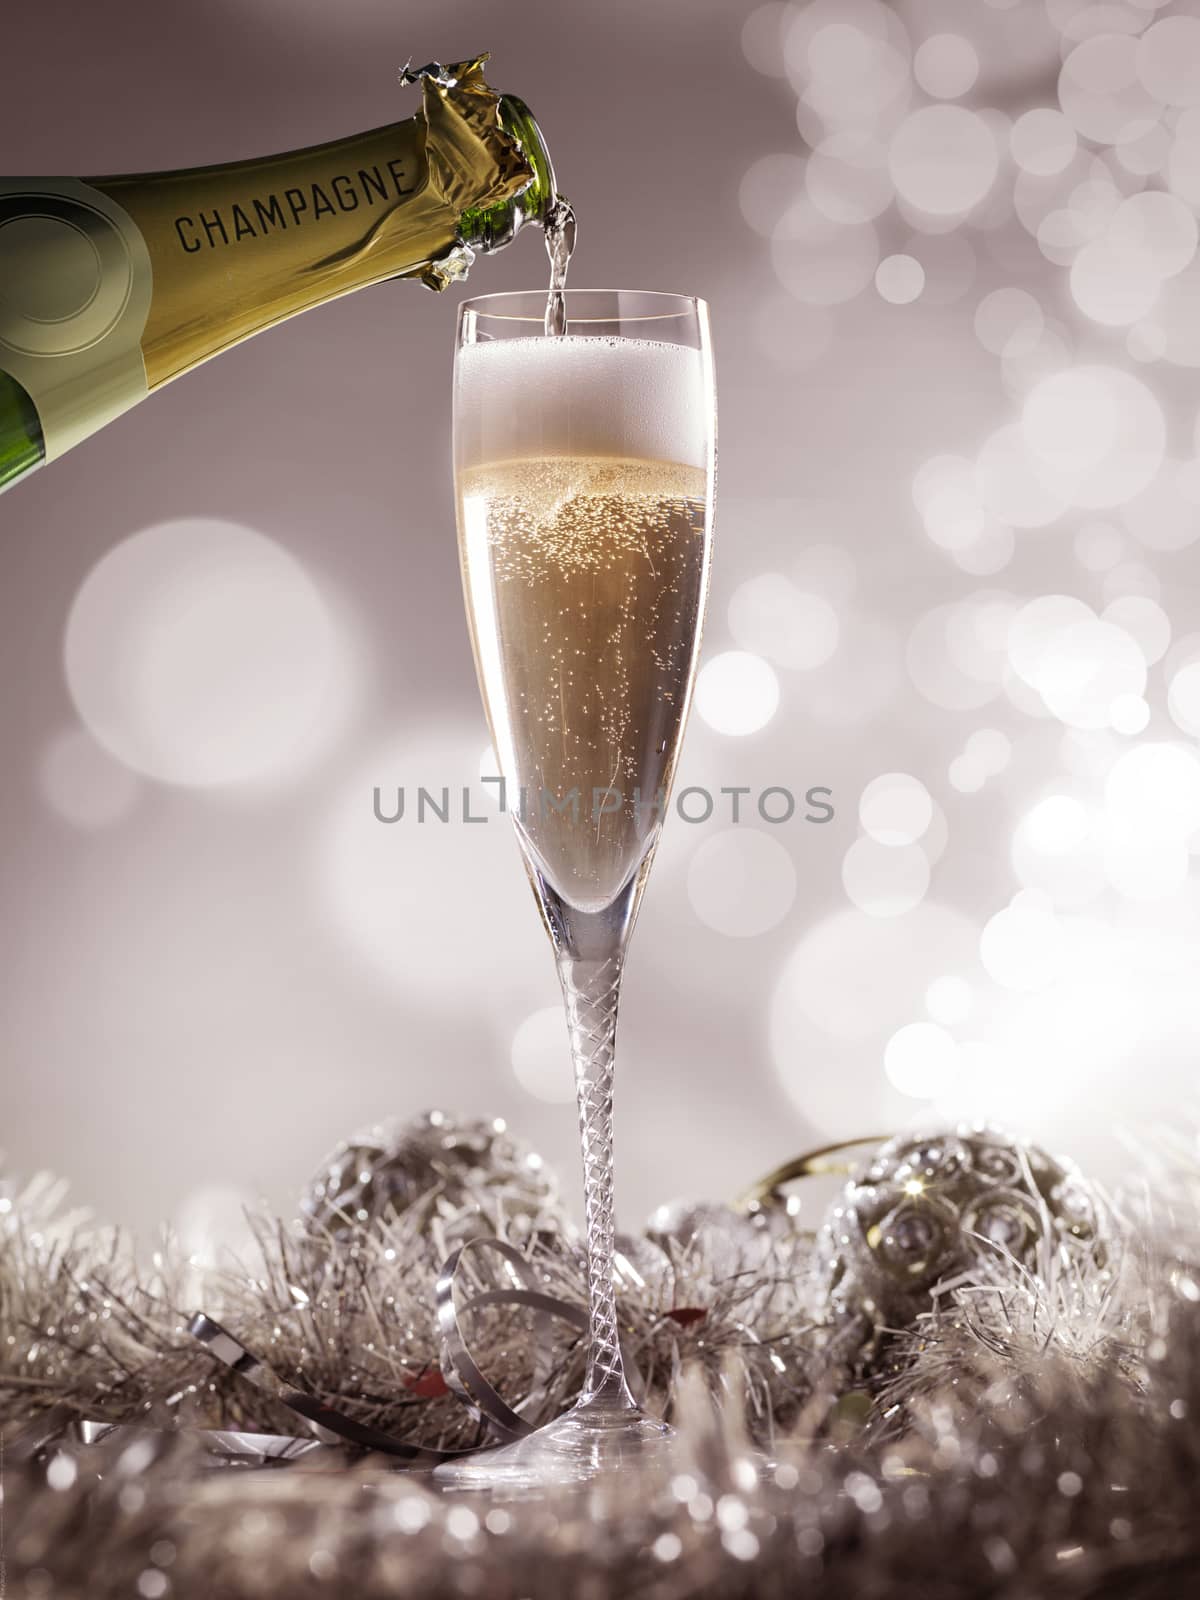 Crystal luxury champagne glass with champagne bottle and decorat by janssenkruseproductions